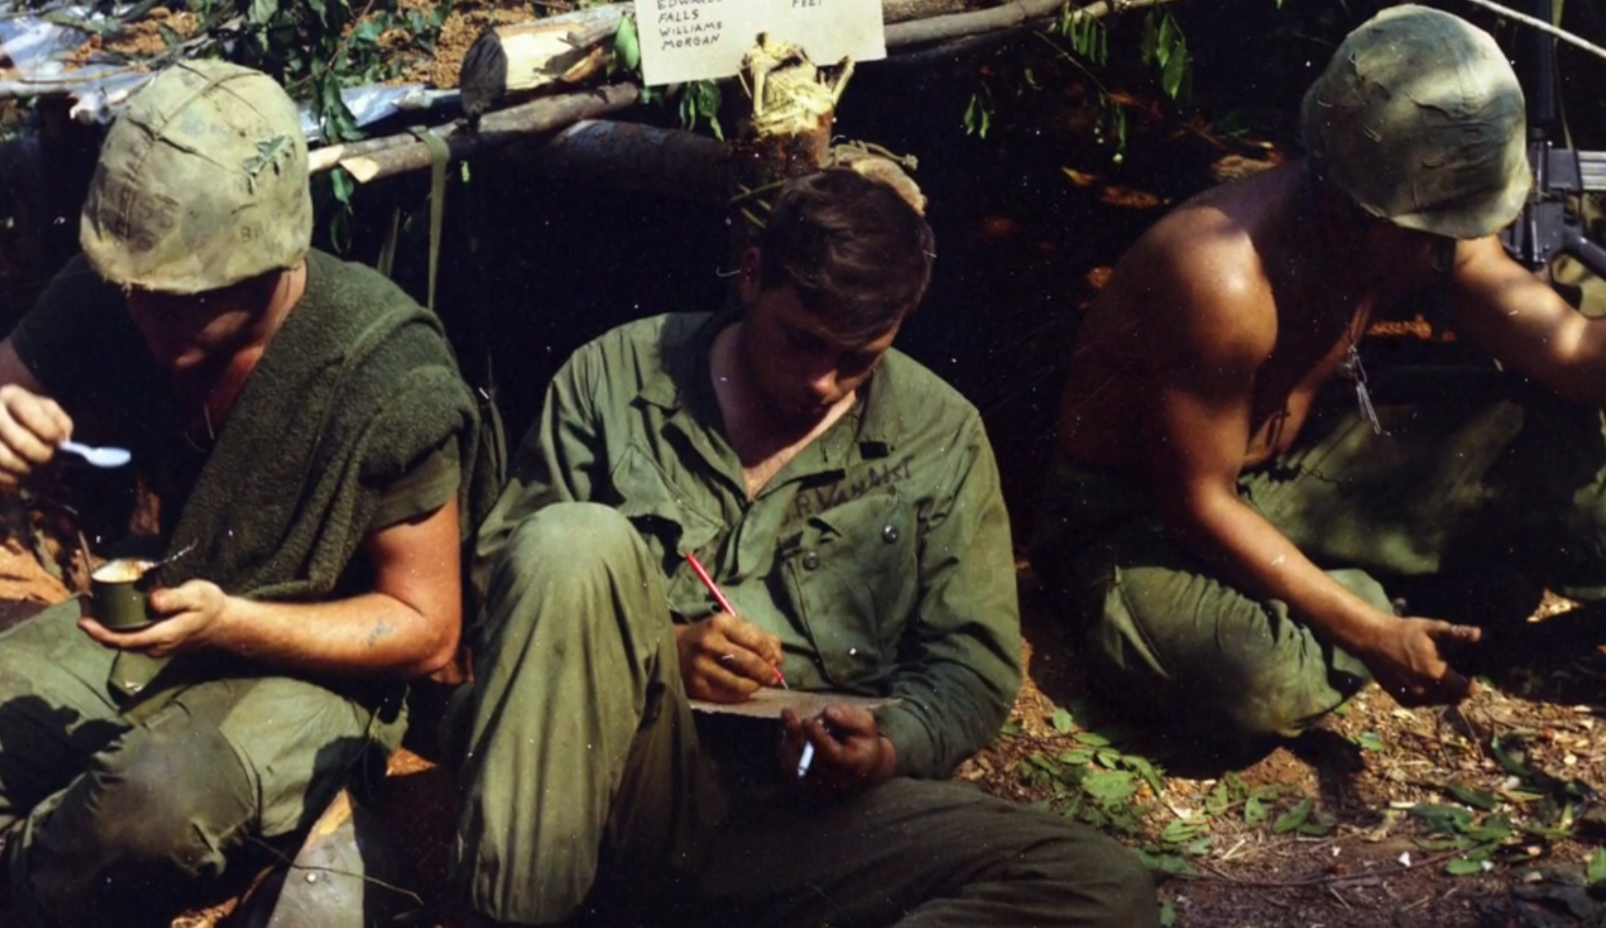 Vintage photo of soldiers sitting outside writing letters in the 1960s or early 1970s.